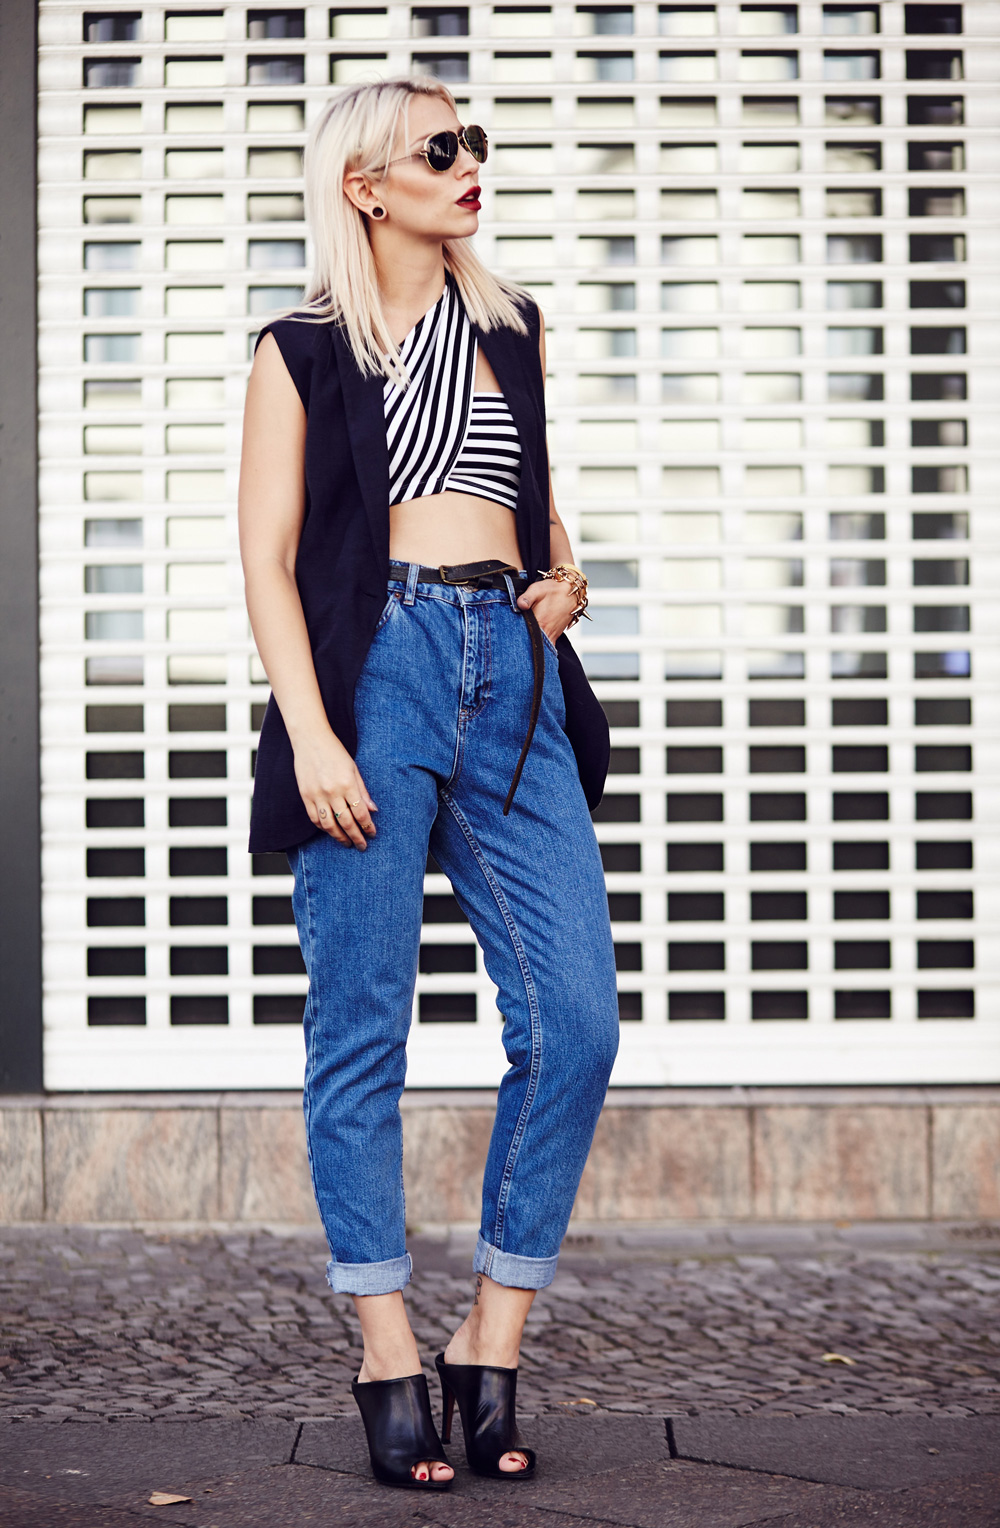 summer street style from Berlin | wearing a striped crop top and Mom Jeans | via Masha Sedgwick